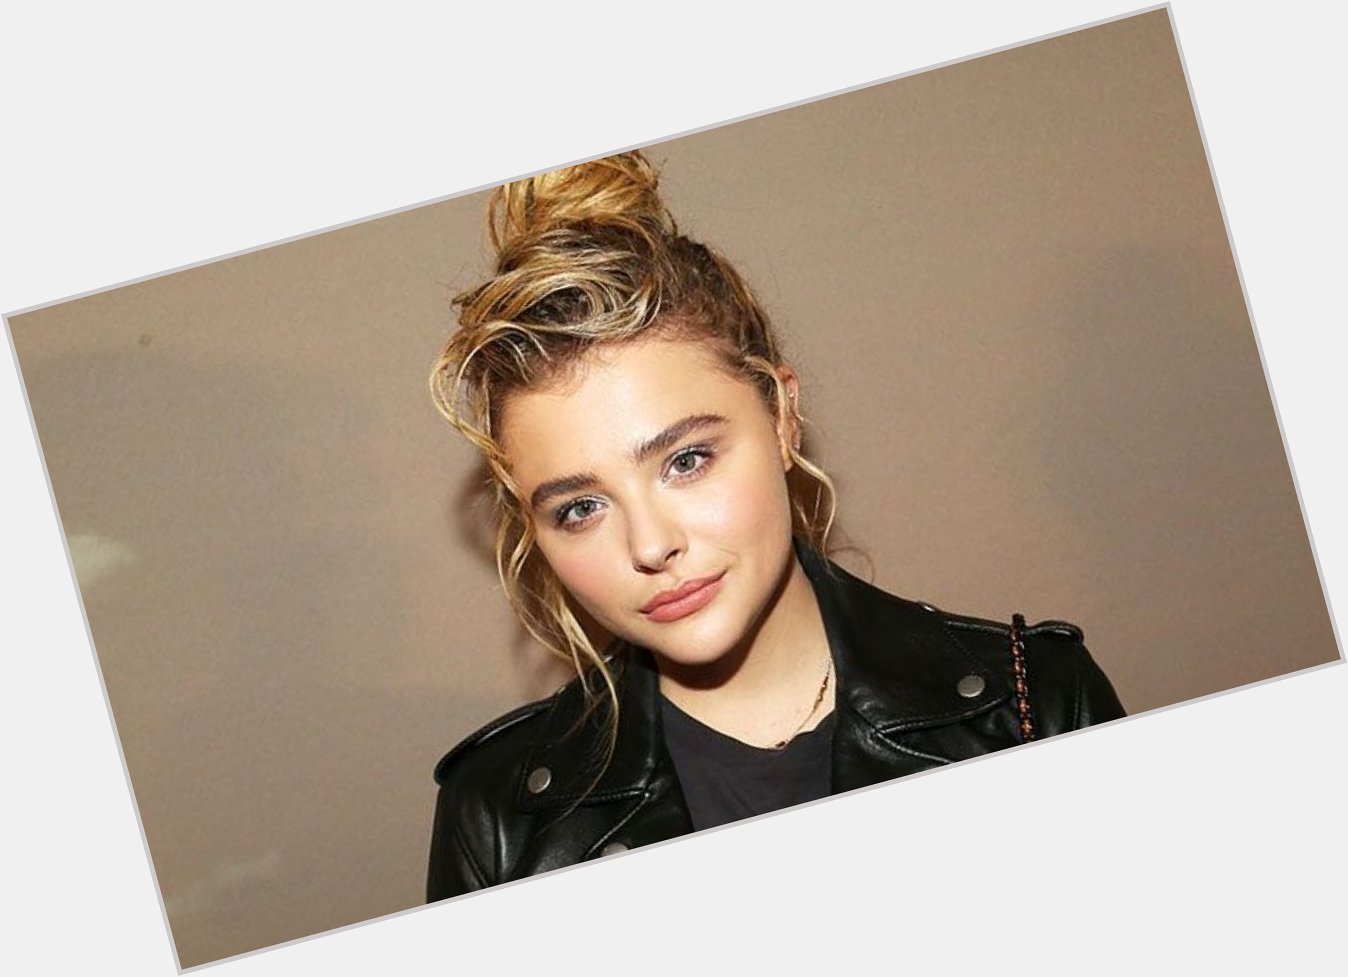 Happy birthday to Chloë Grace Moretz!!!
Today she\s 24 years old 